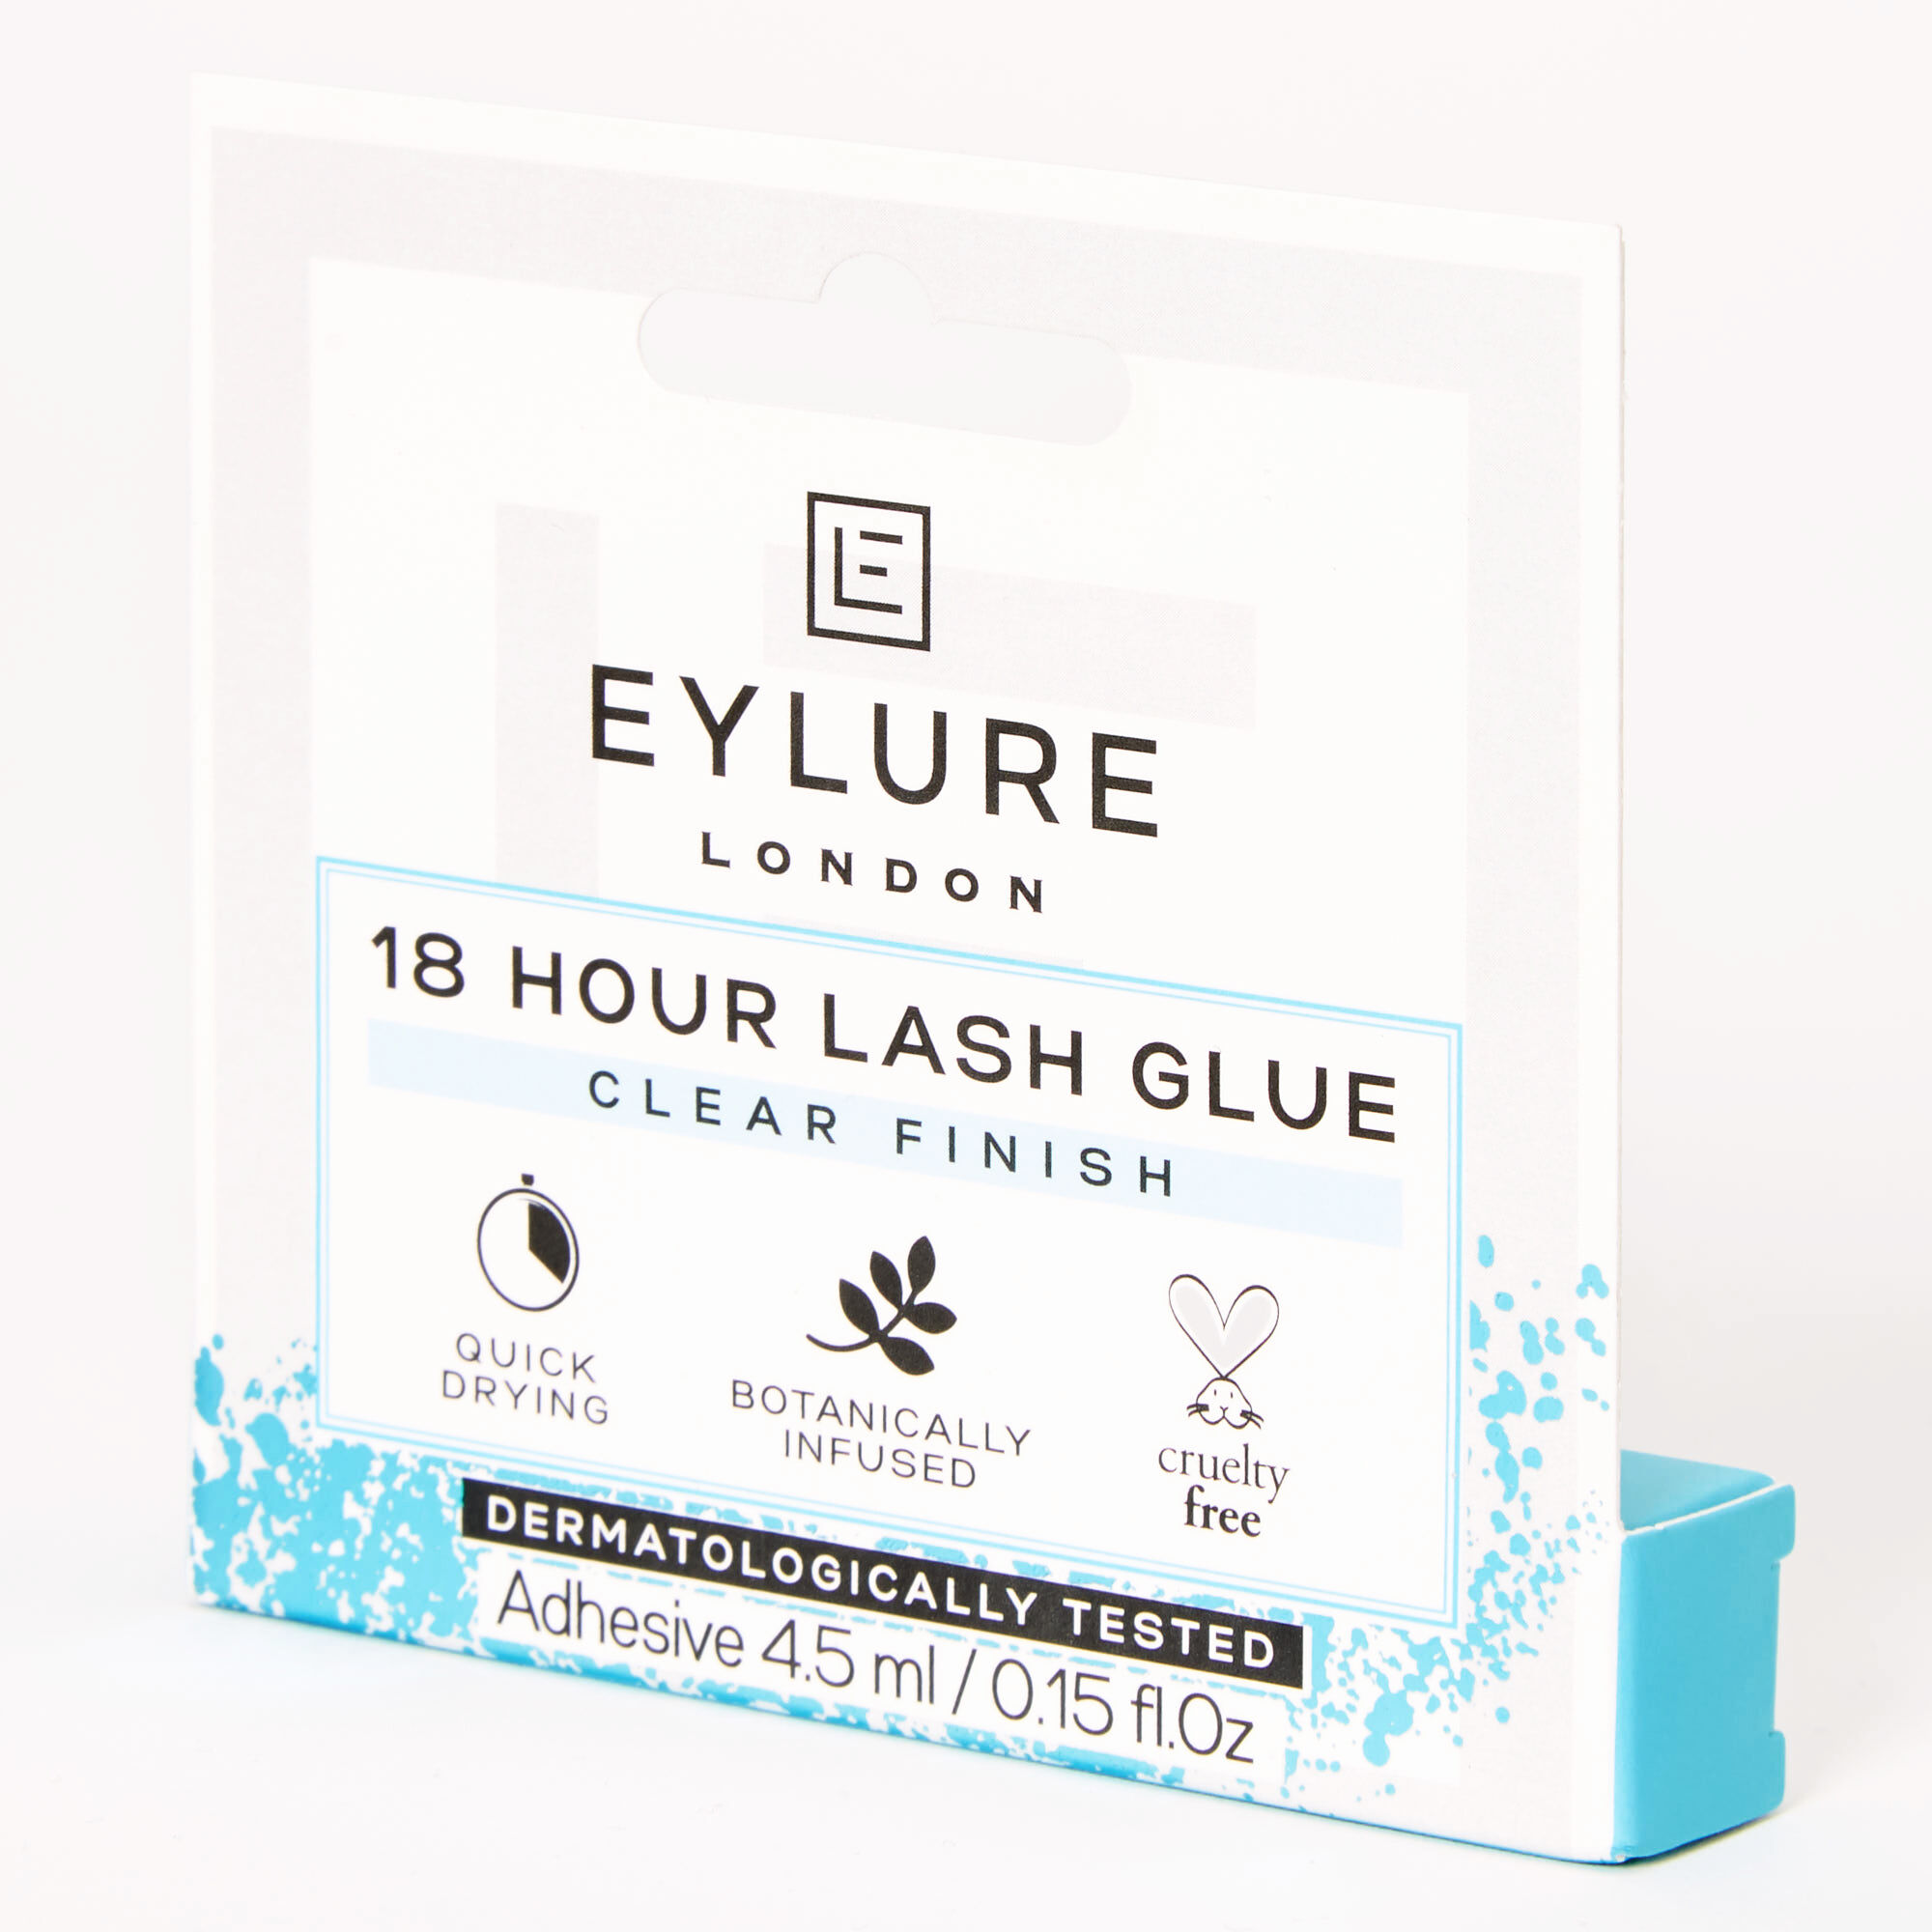 View Claires Eylure London 18 Hour Lash Glue Clear Green information